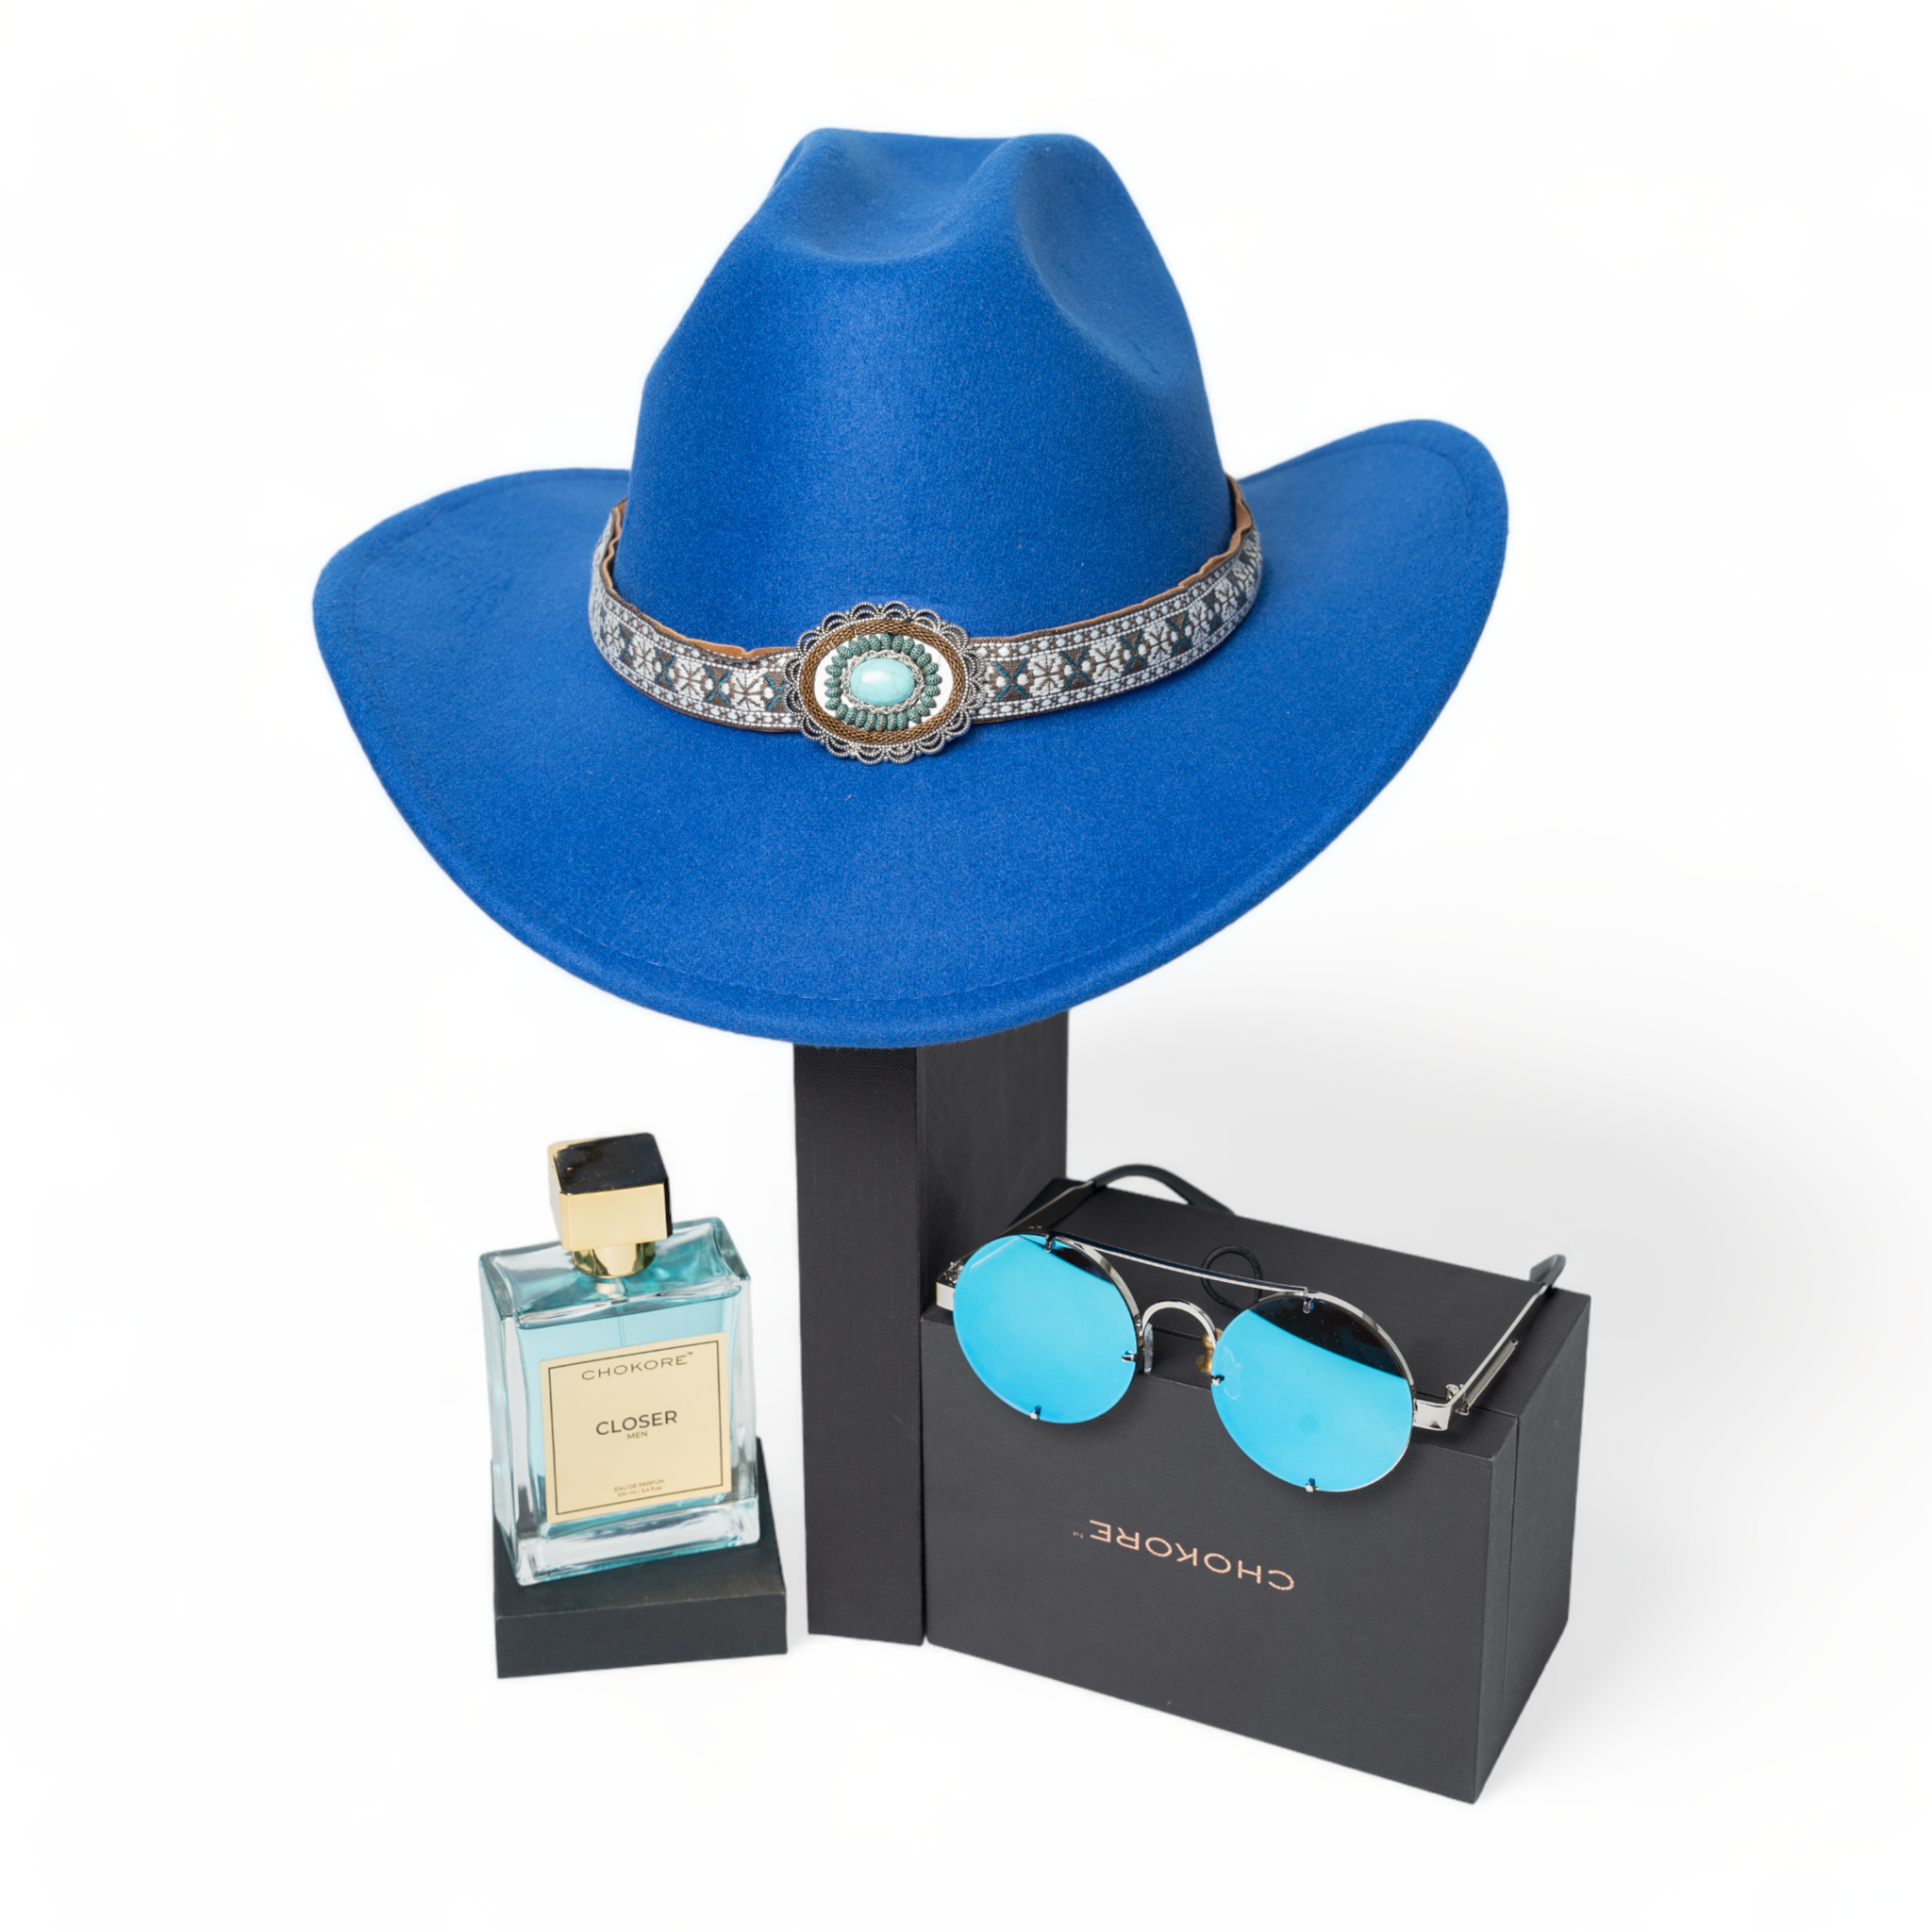 Chokore Special 3-in-1 Gift Set for Him (Blue Cowboy Hat, Round Sunglasses, & Closer Perfume)